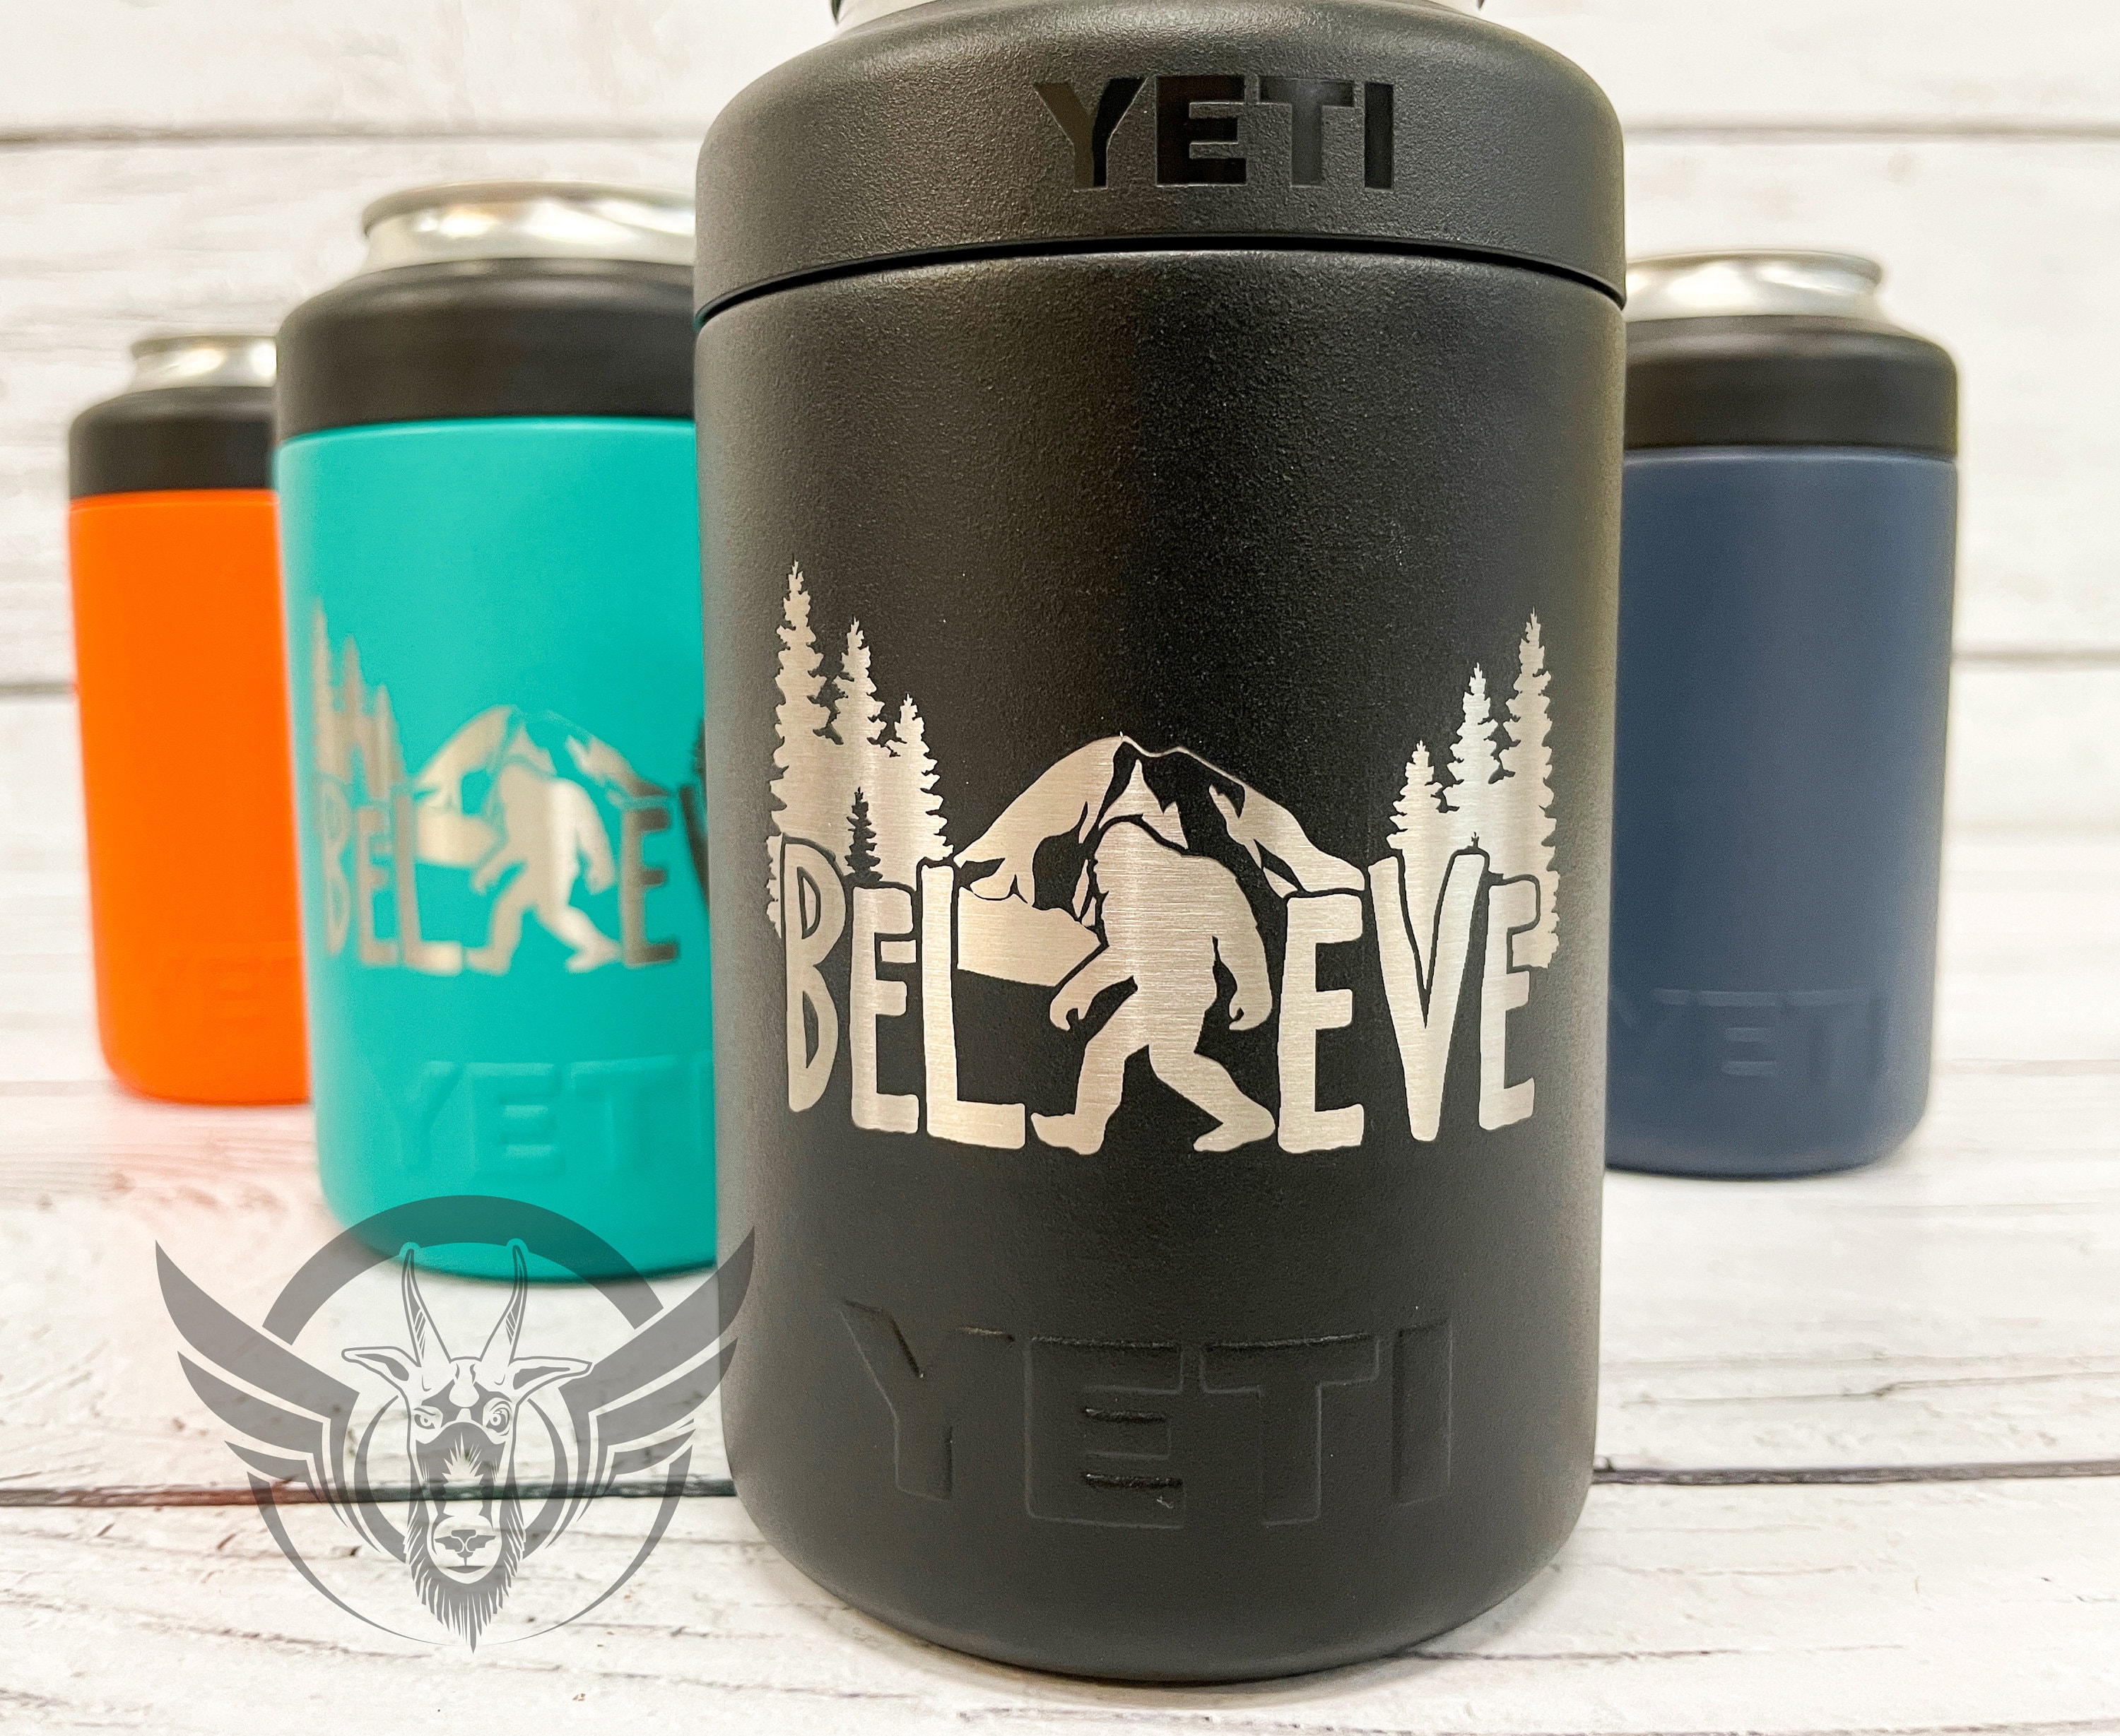 Personalized Personalized YETI Rambler 16 oz Colster Tall - Duracoat -  Customize with Your Logo, Monogram, or Design - Custom Tumbler Shop